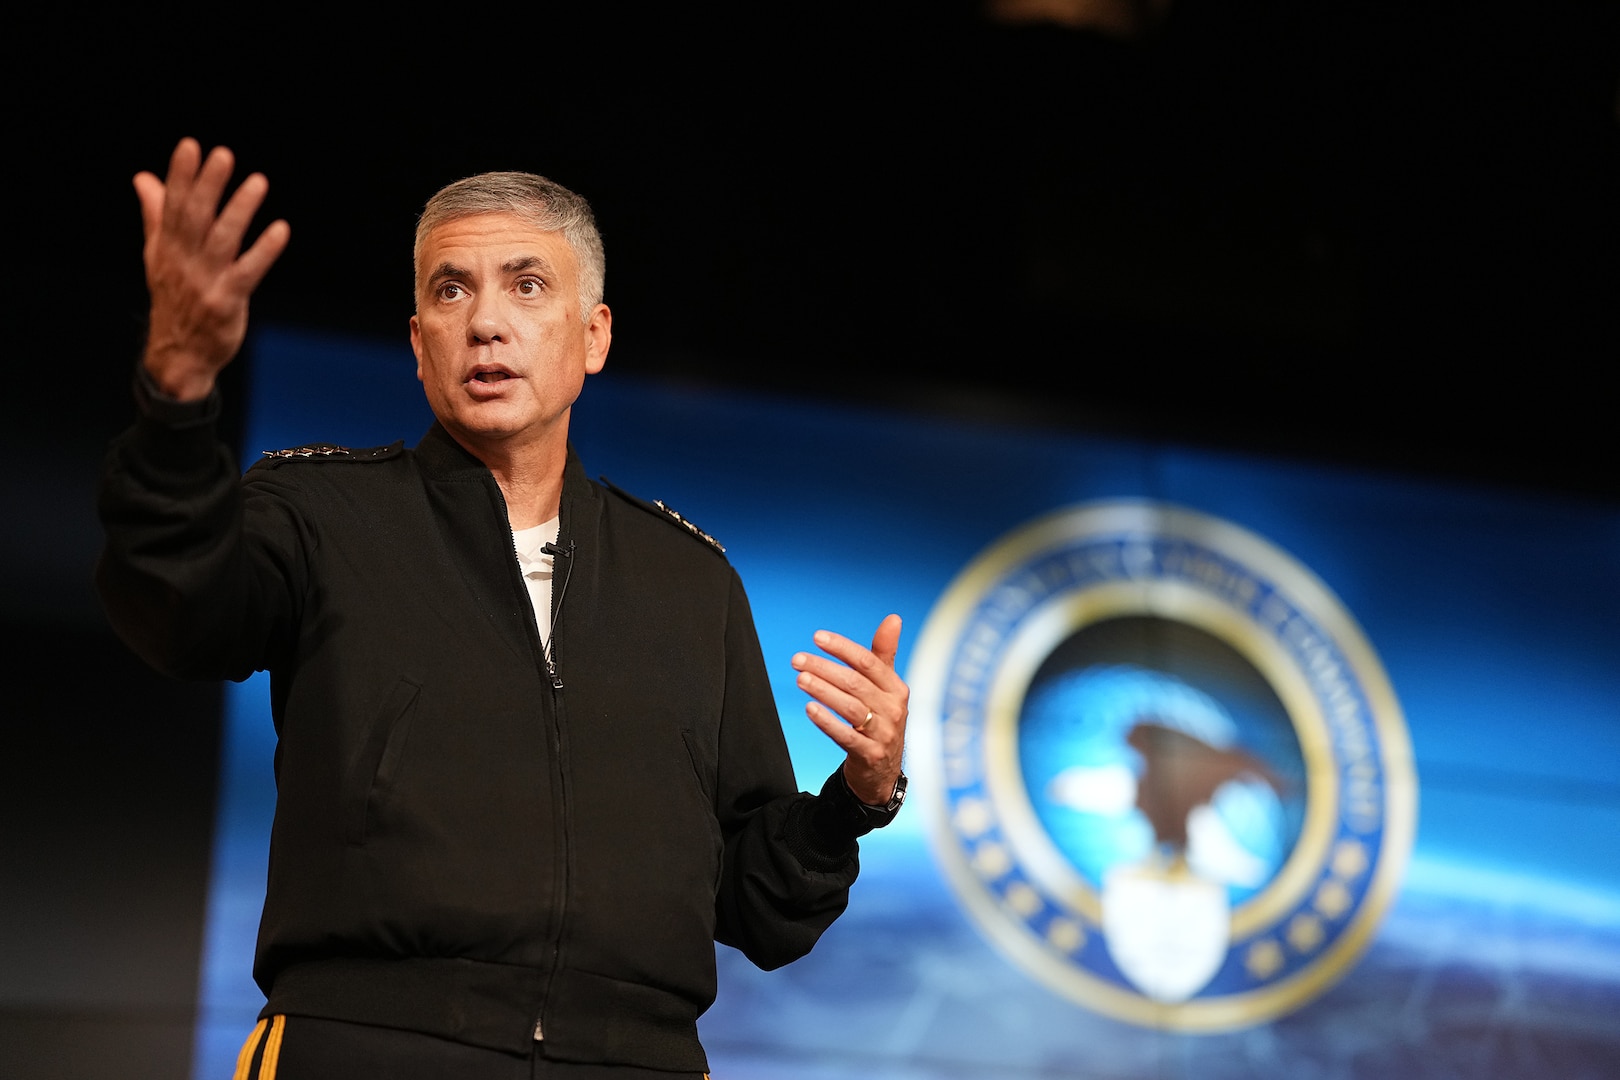 U.S. Army General Paul M. Nakasone, U.S. Cyber Command  commander and National Security Agency director, presents opening remarks for the 10th annual Reserve Component Summit at Fort George G. Meade, Md., Aug. 20, 2021.